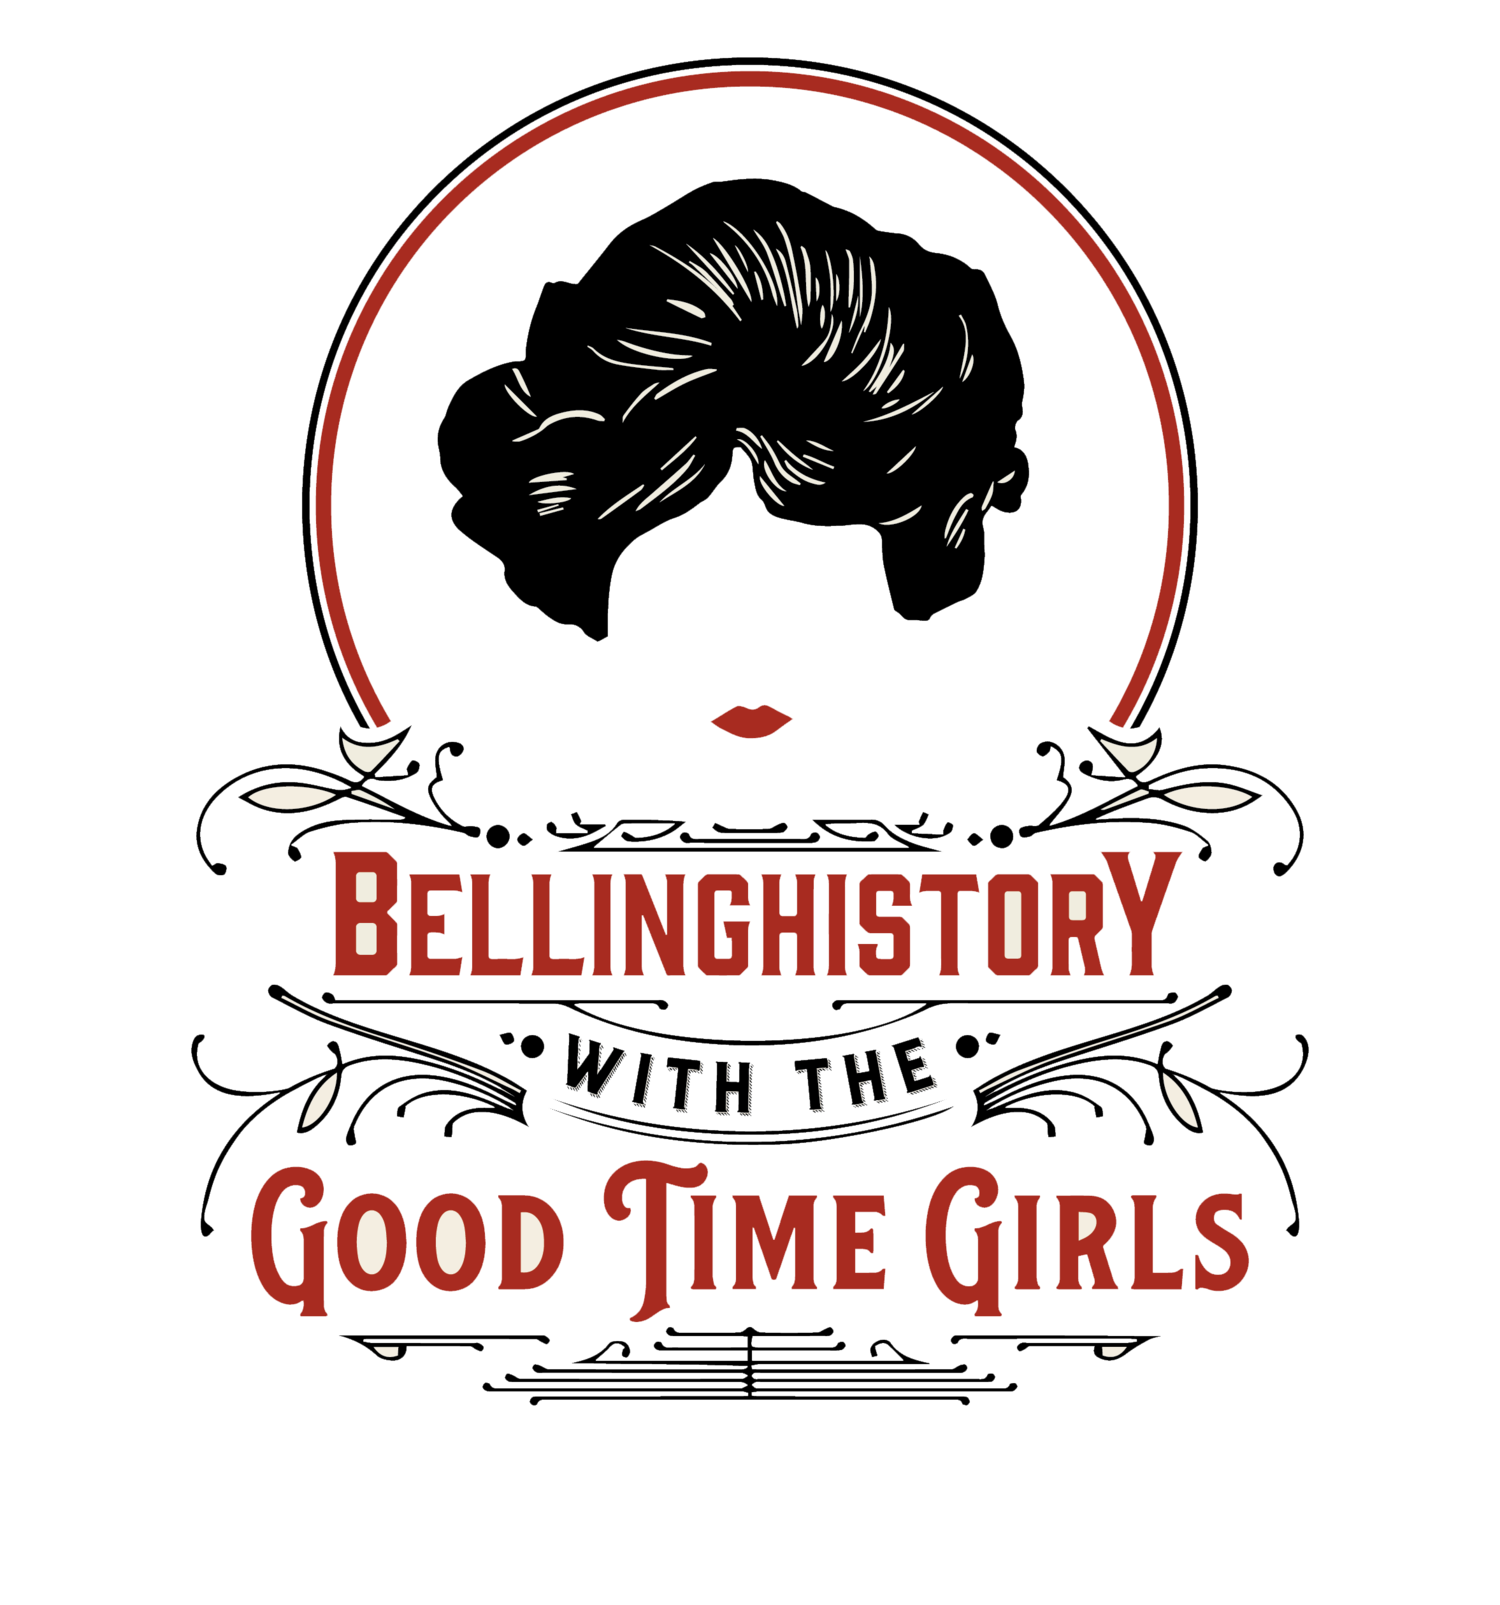 BELLINGHISTORY with the GOOD TIME GIRLS